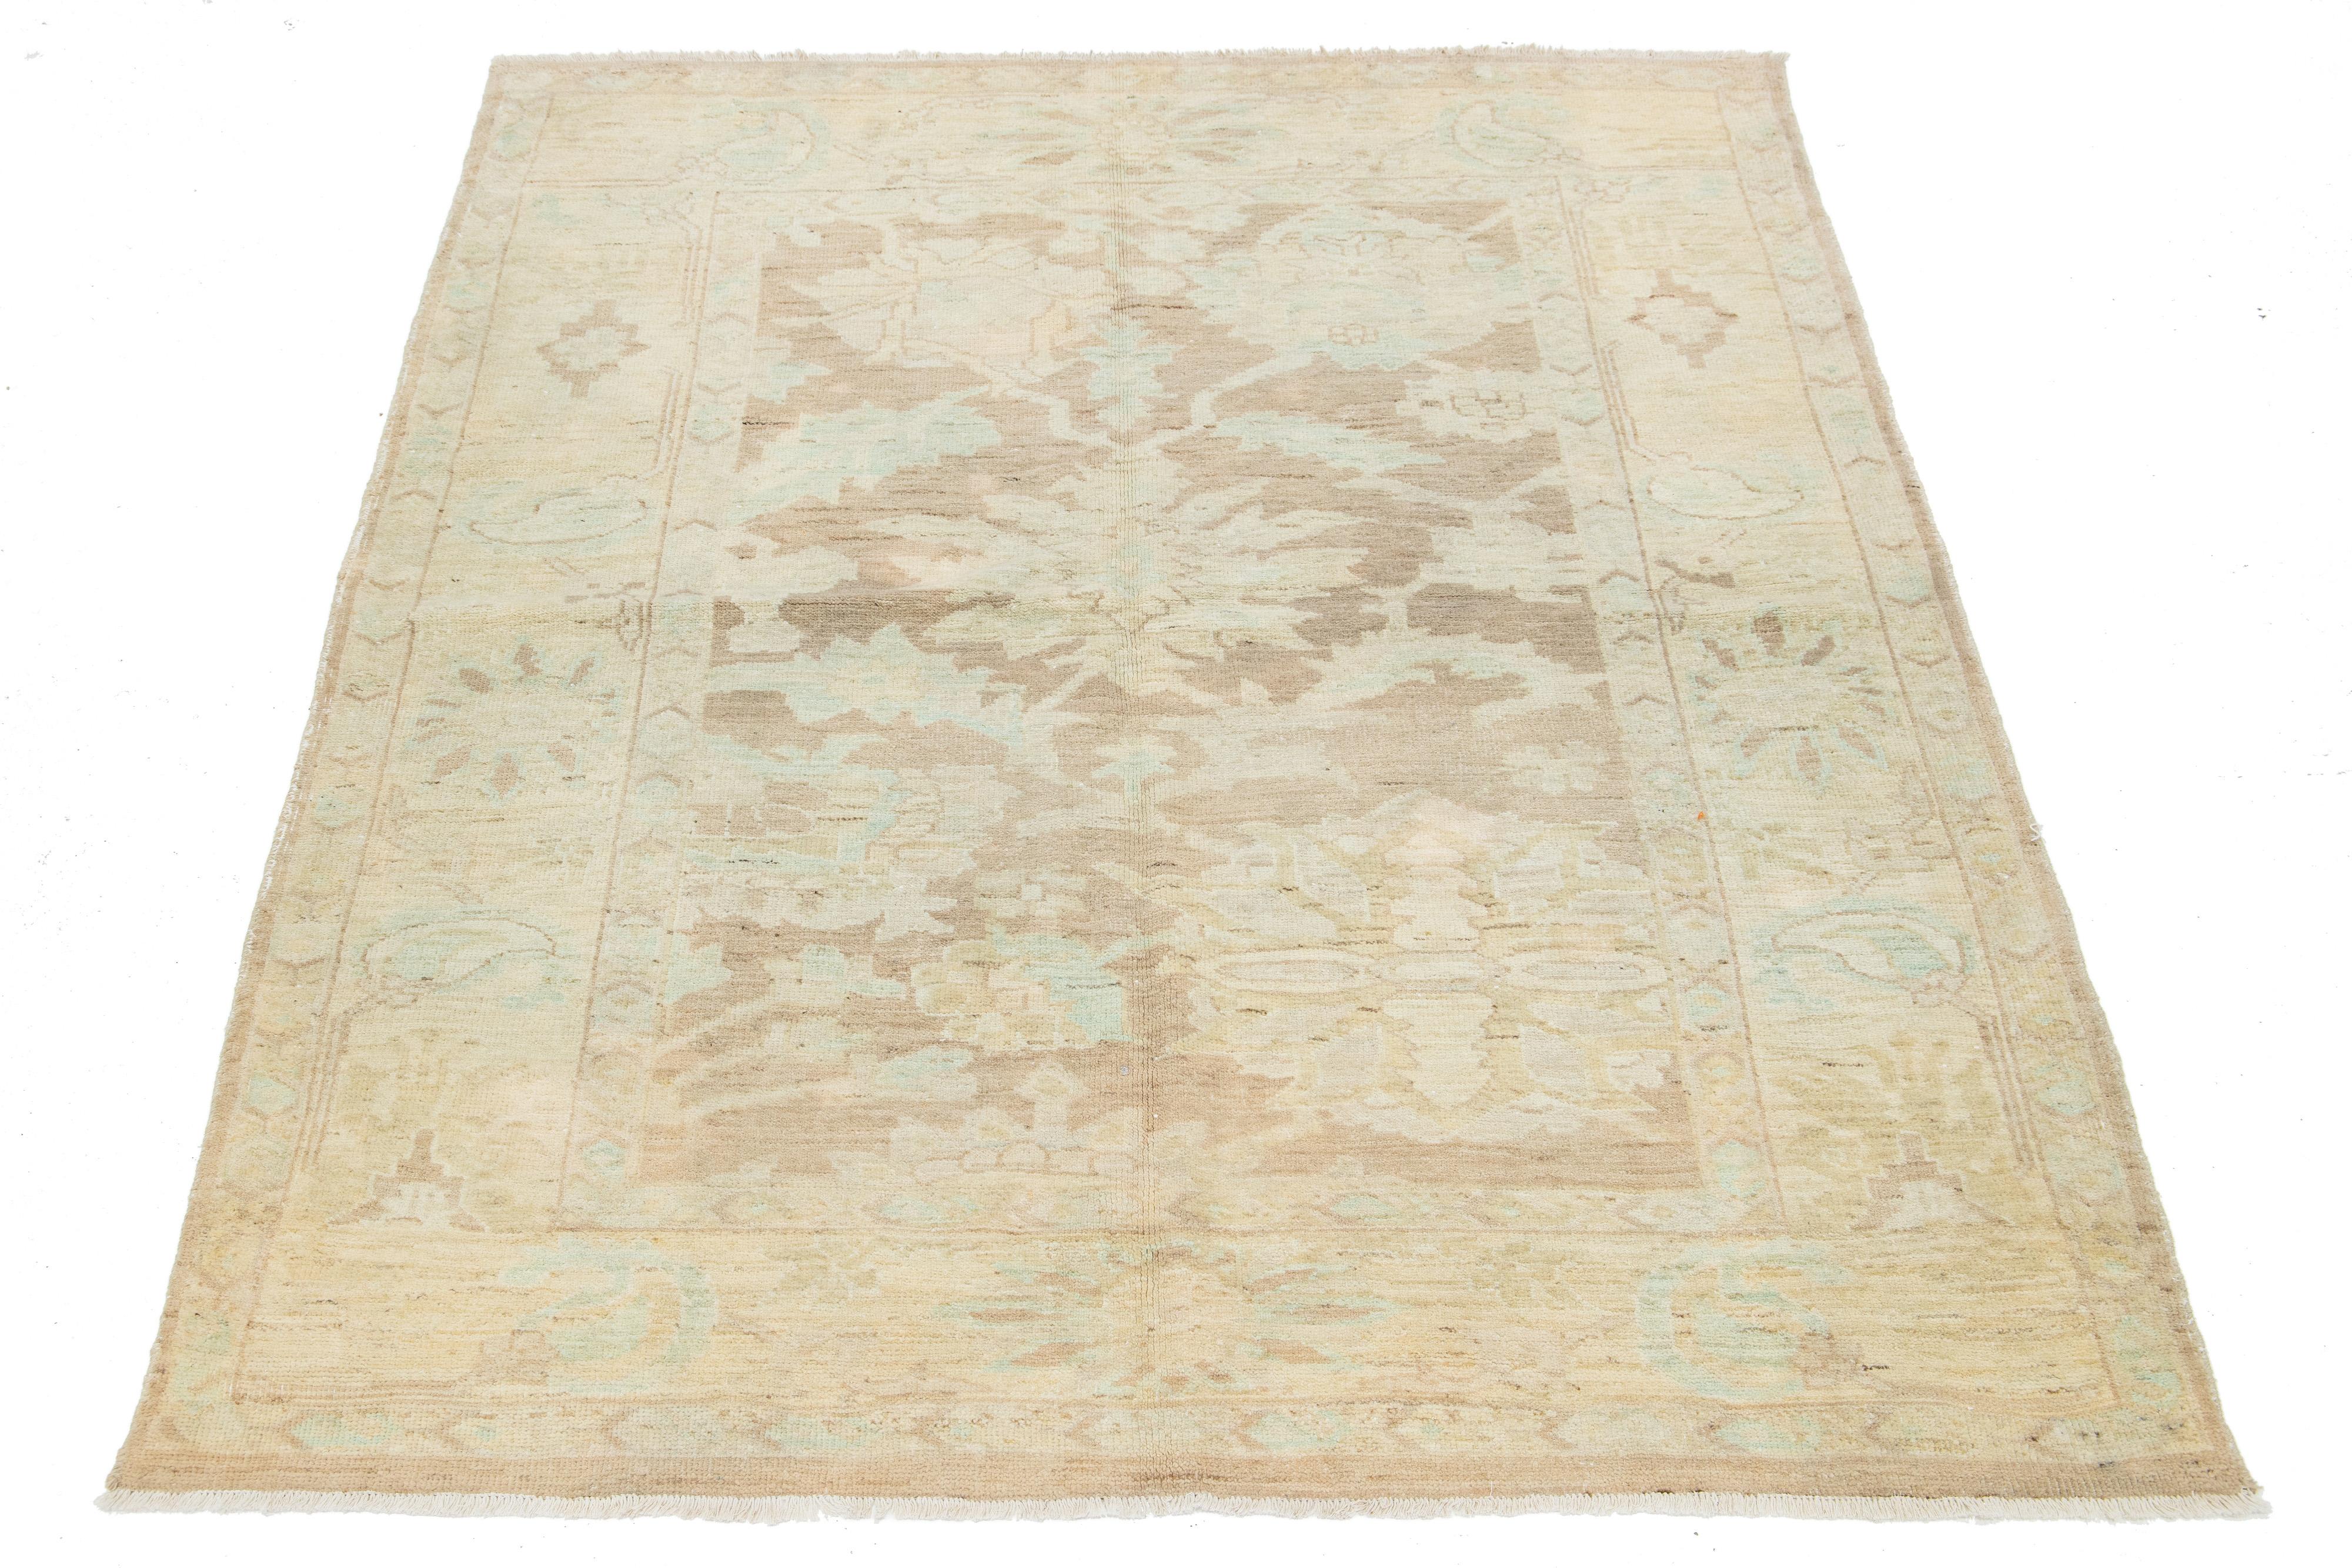 A hand-knotted wool rug featuring a light brown color field with a blue, beige, and green floral design.

This rug measures at 5'3